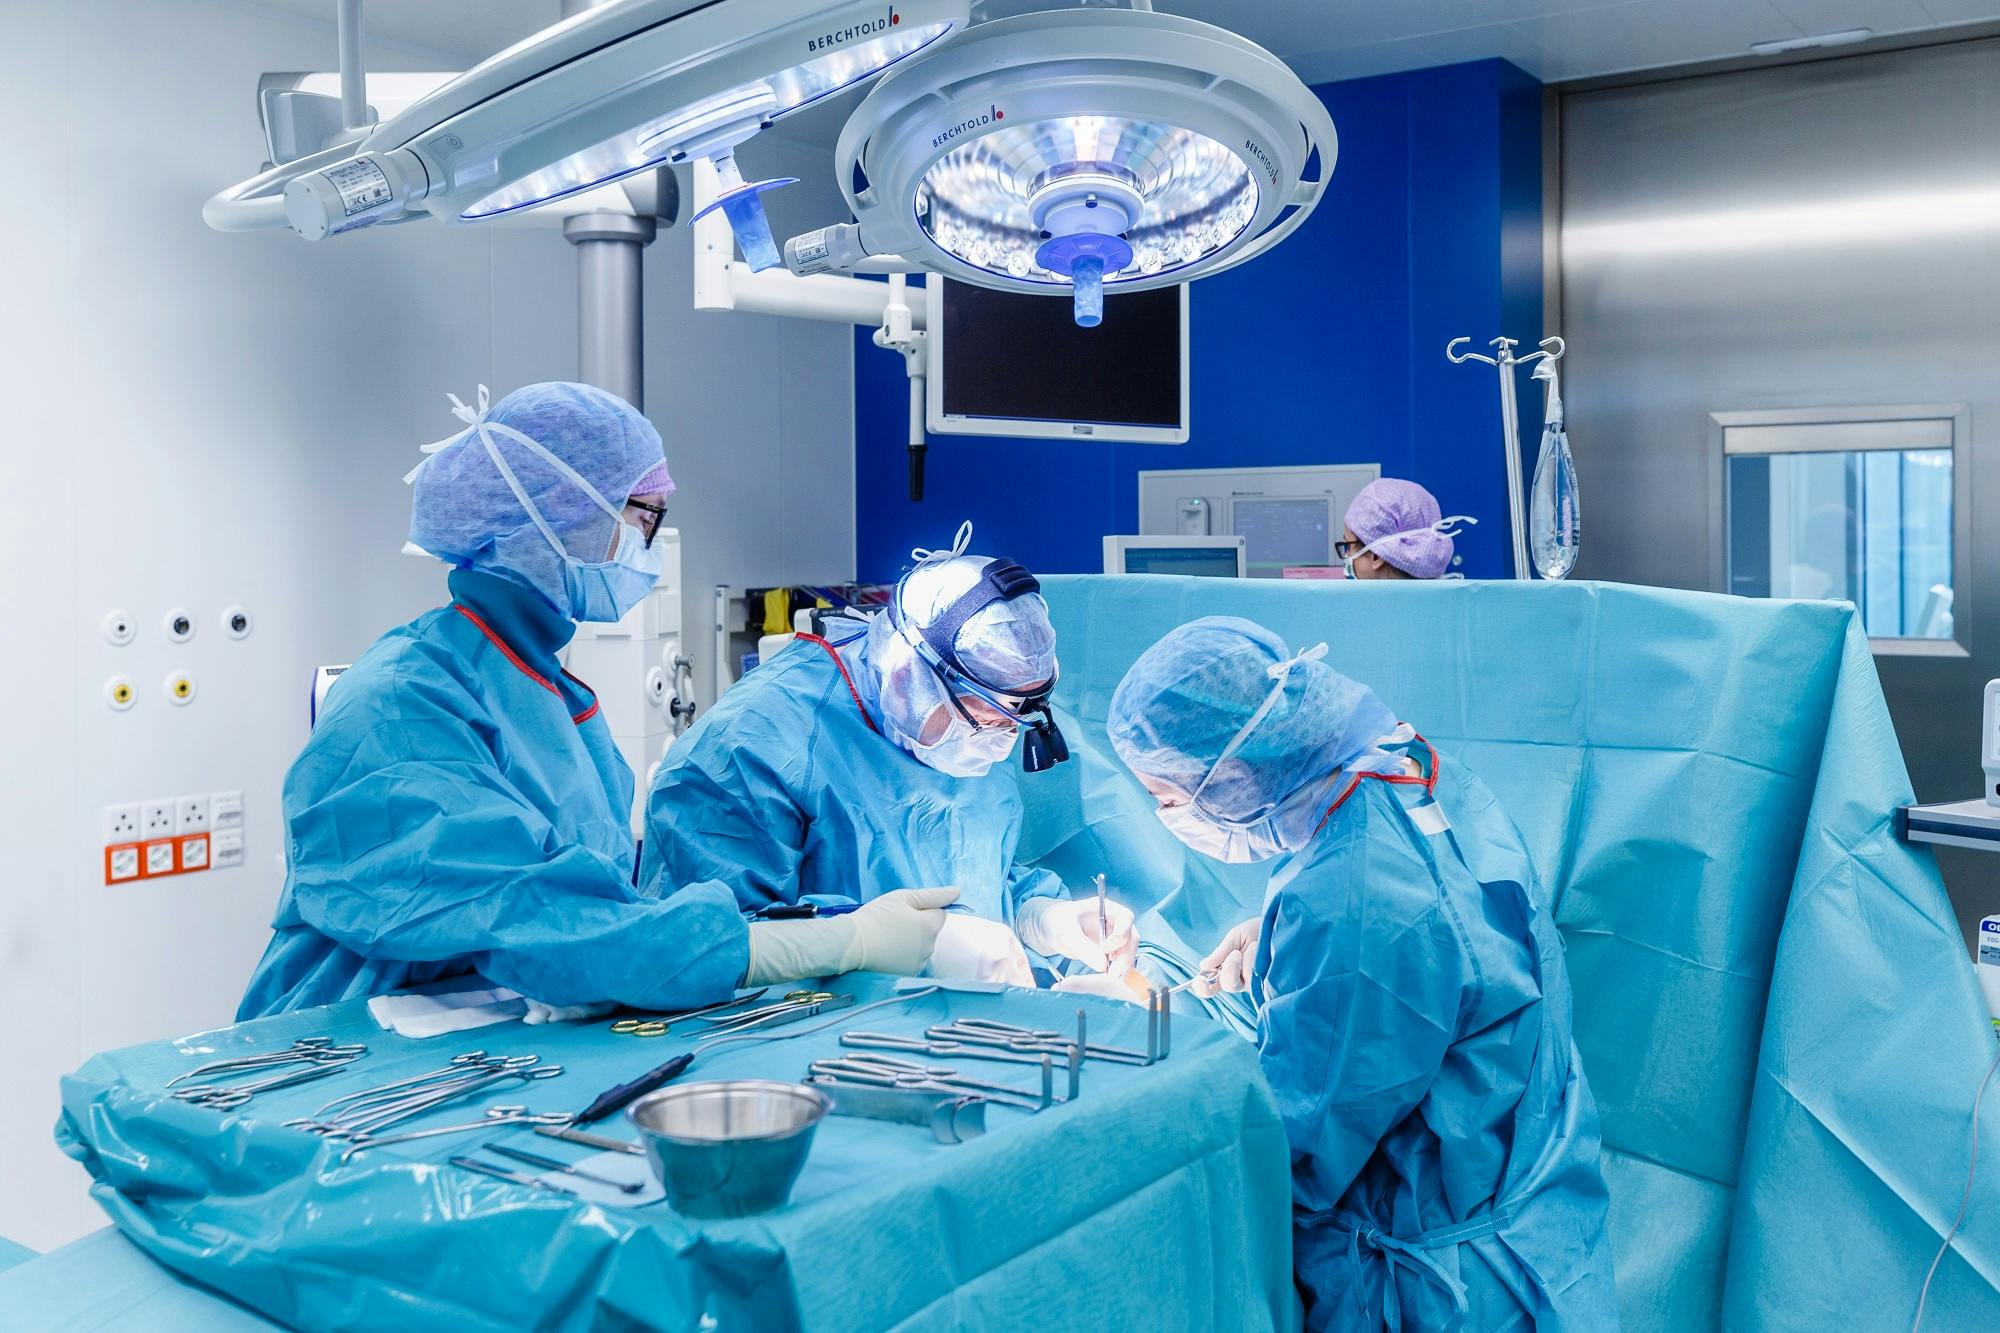 Surgeon team during an operation in the operating theatre.